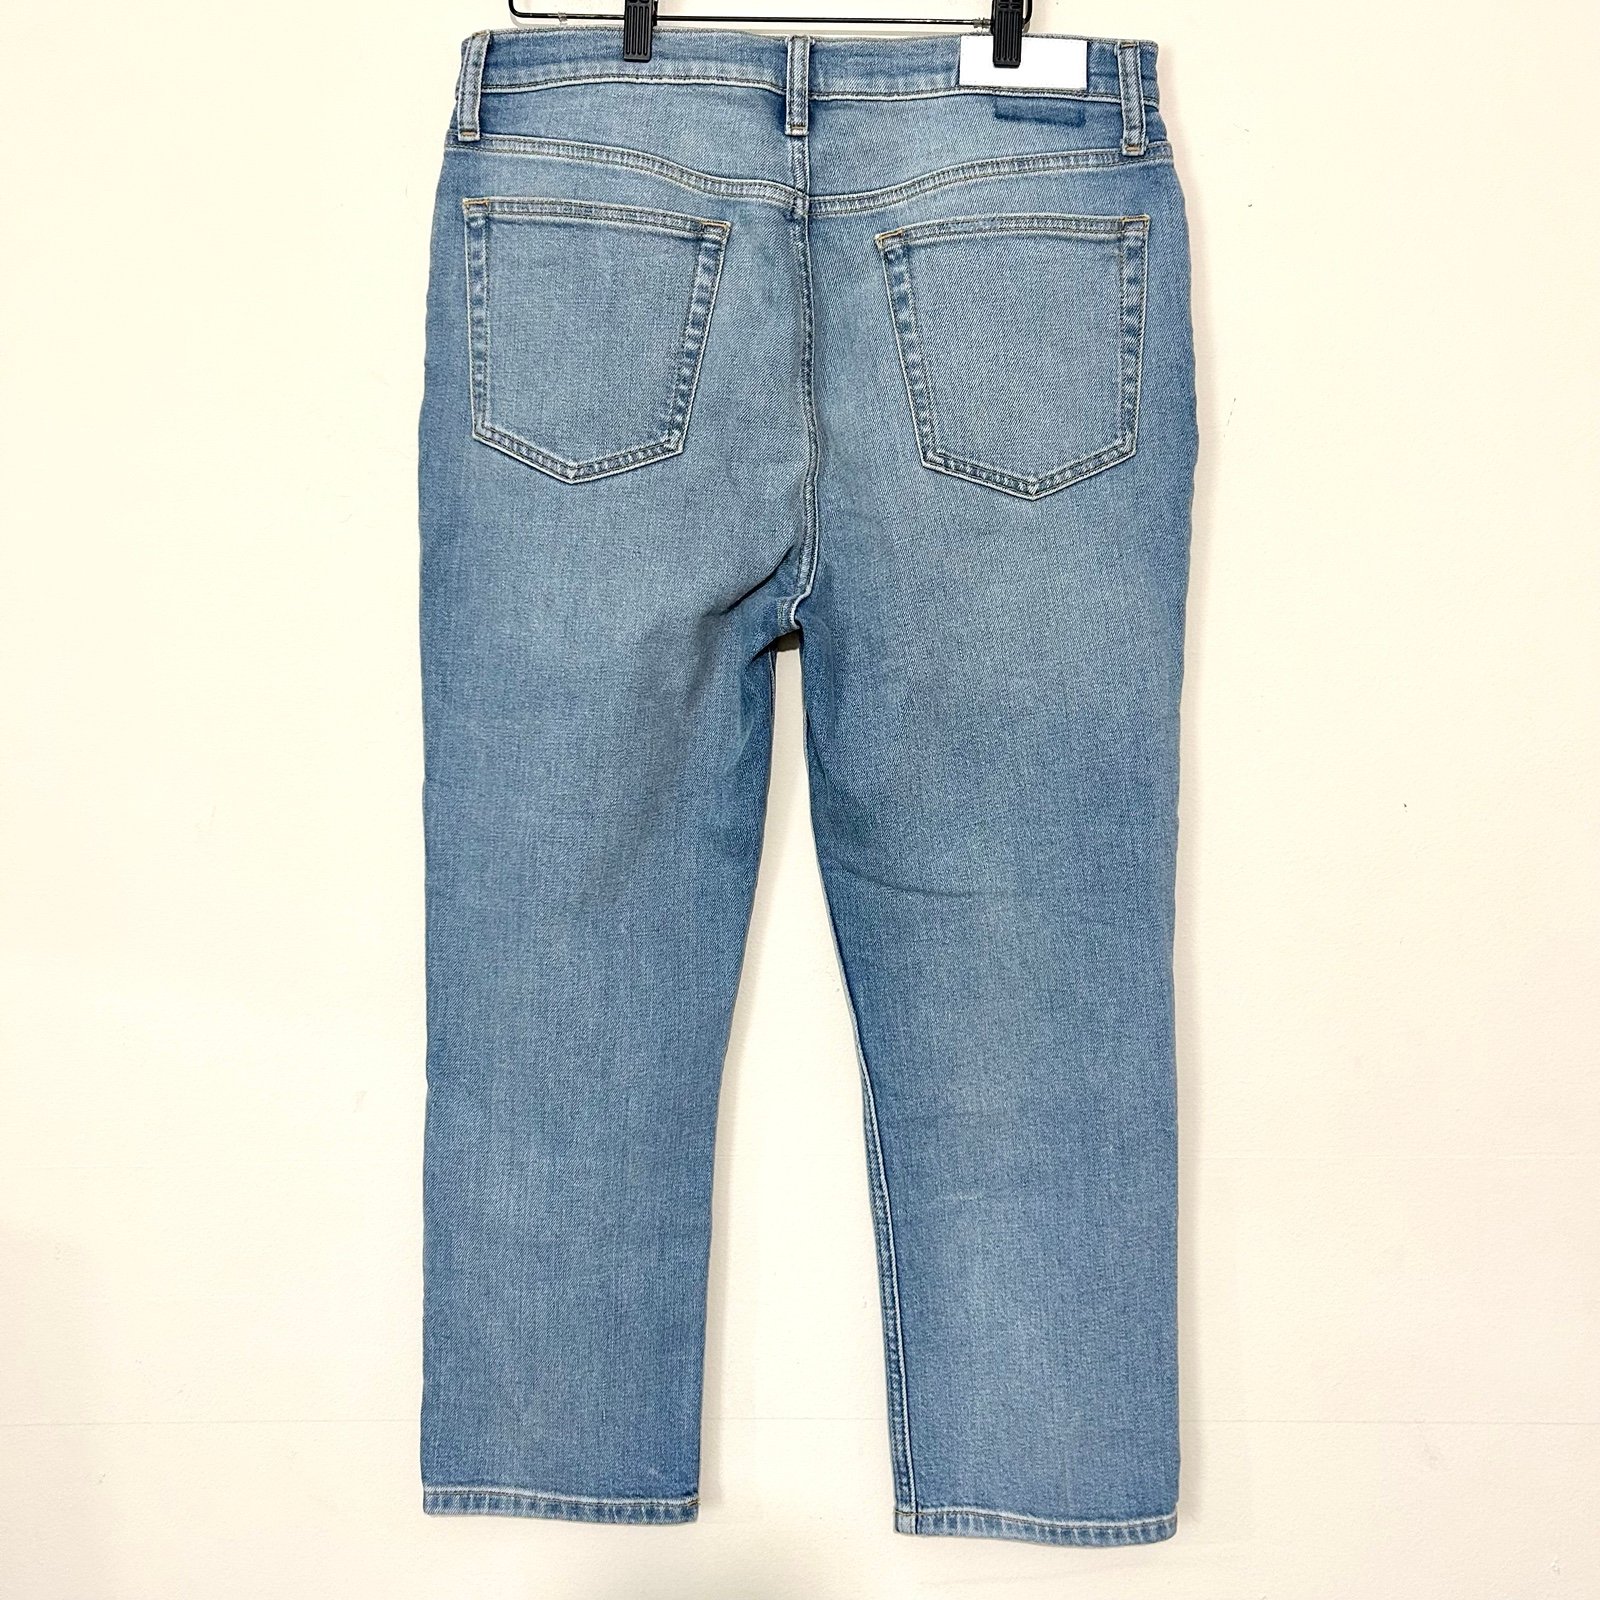 reasonable price Re/Done 90s High Rise Ankle Crop Jeans in Worn Blue SIZE 32 LJDizhQfT Fashion